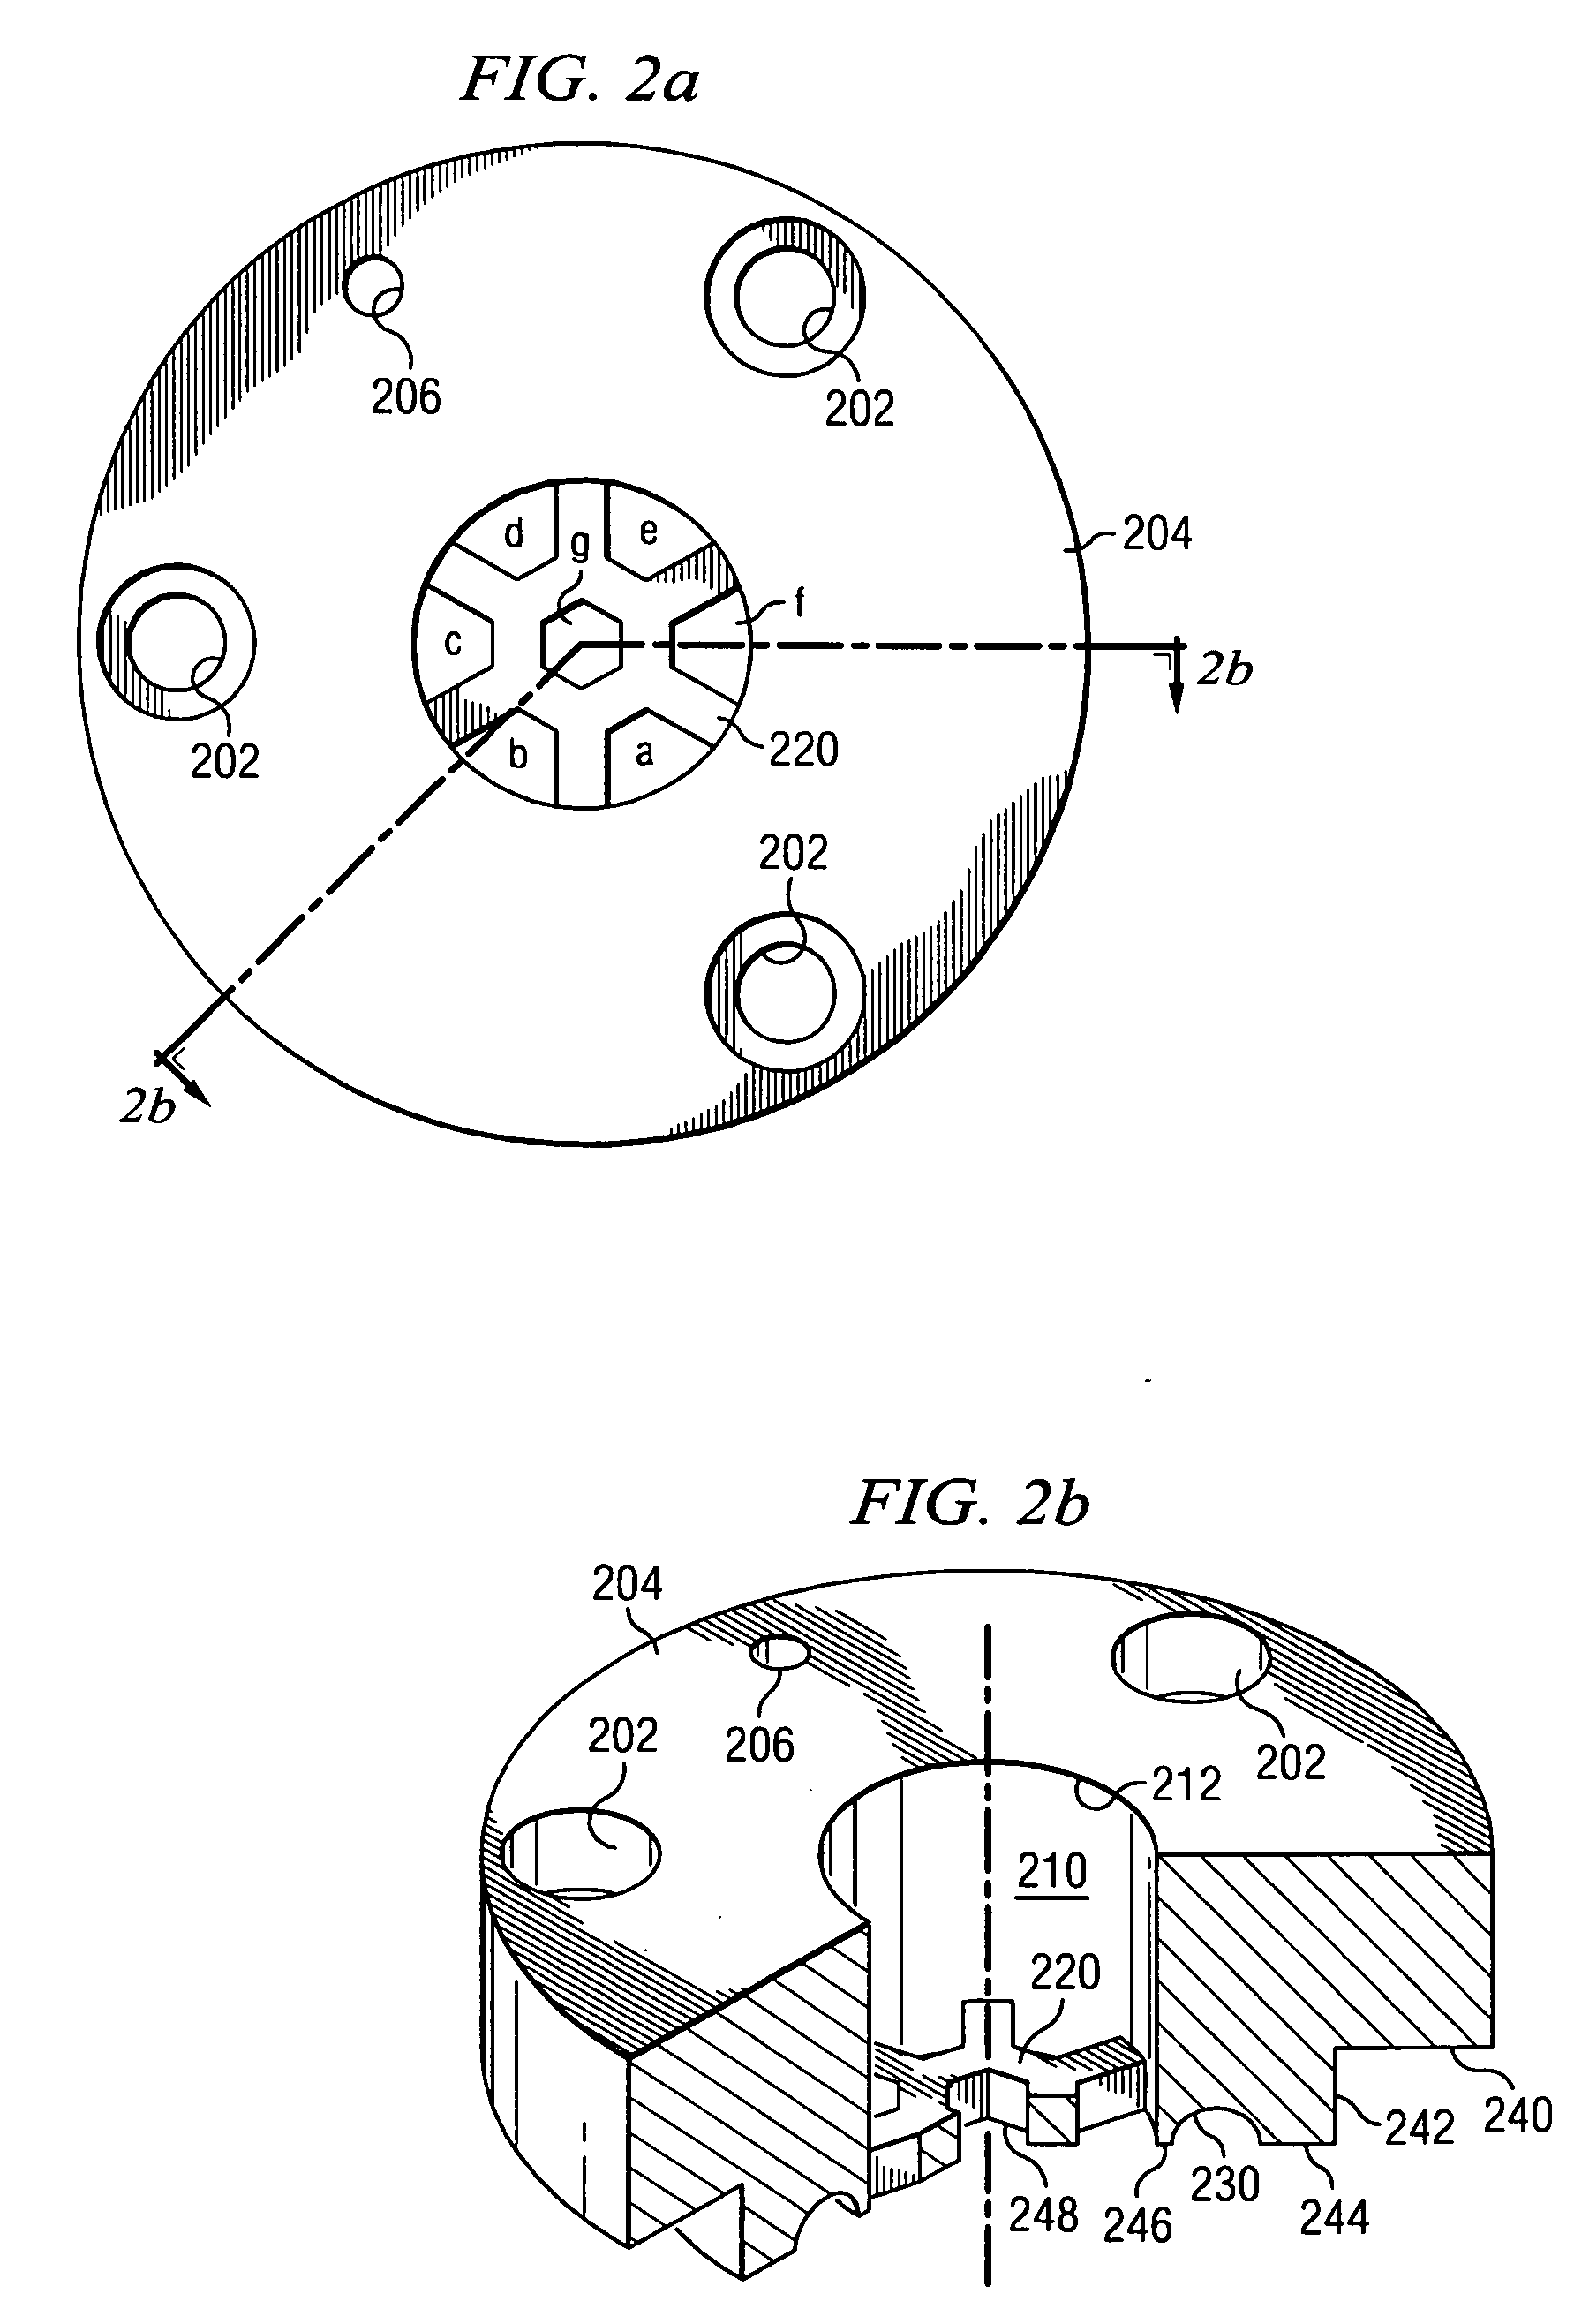 Apparatus and method for improving the dimensional quality of extruded food products having complex shapes